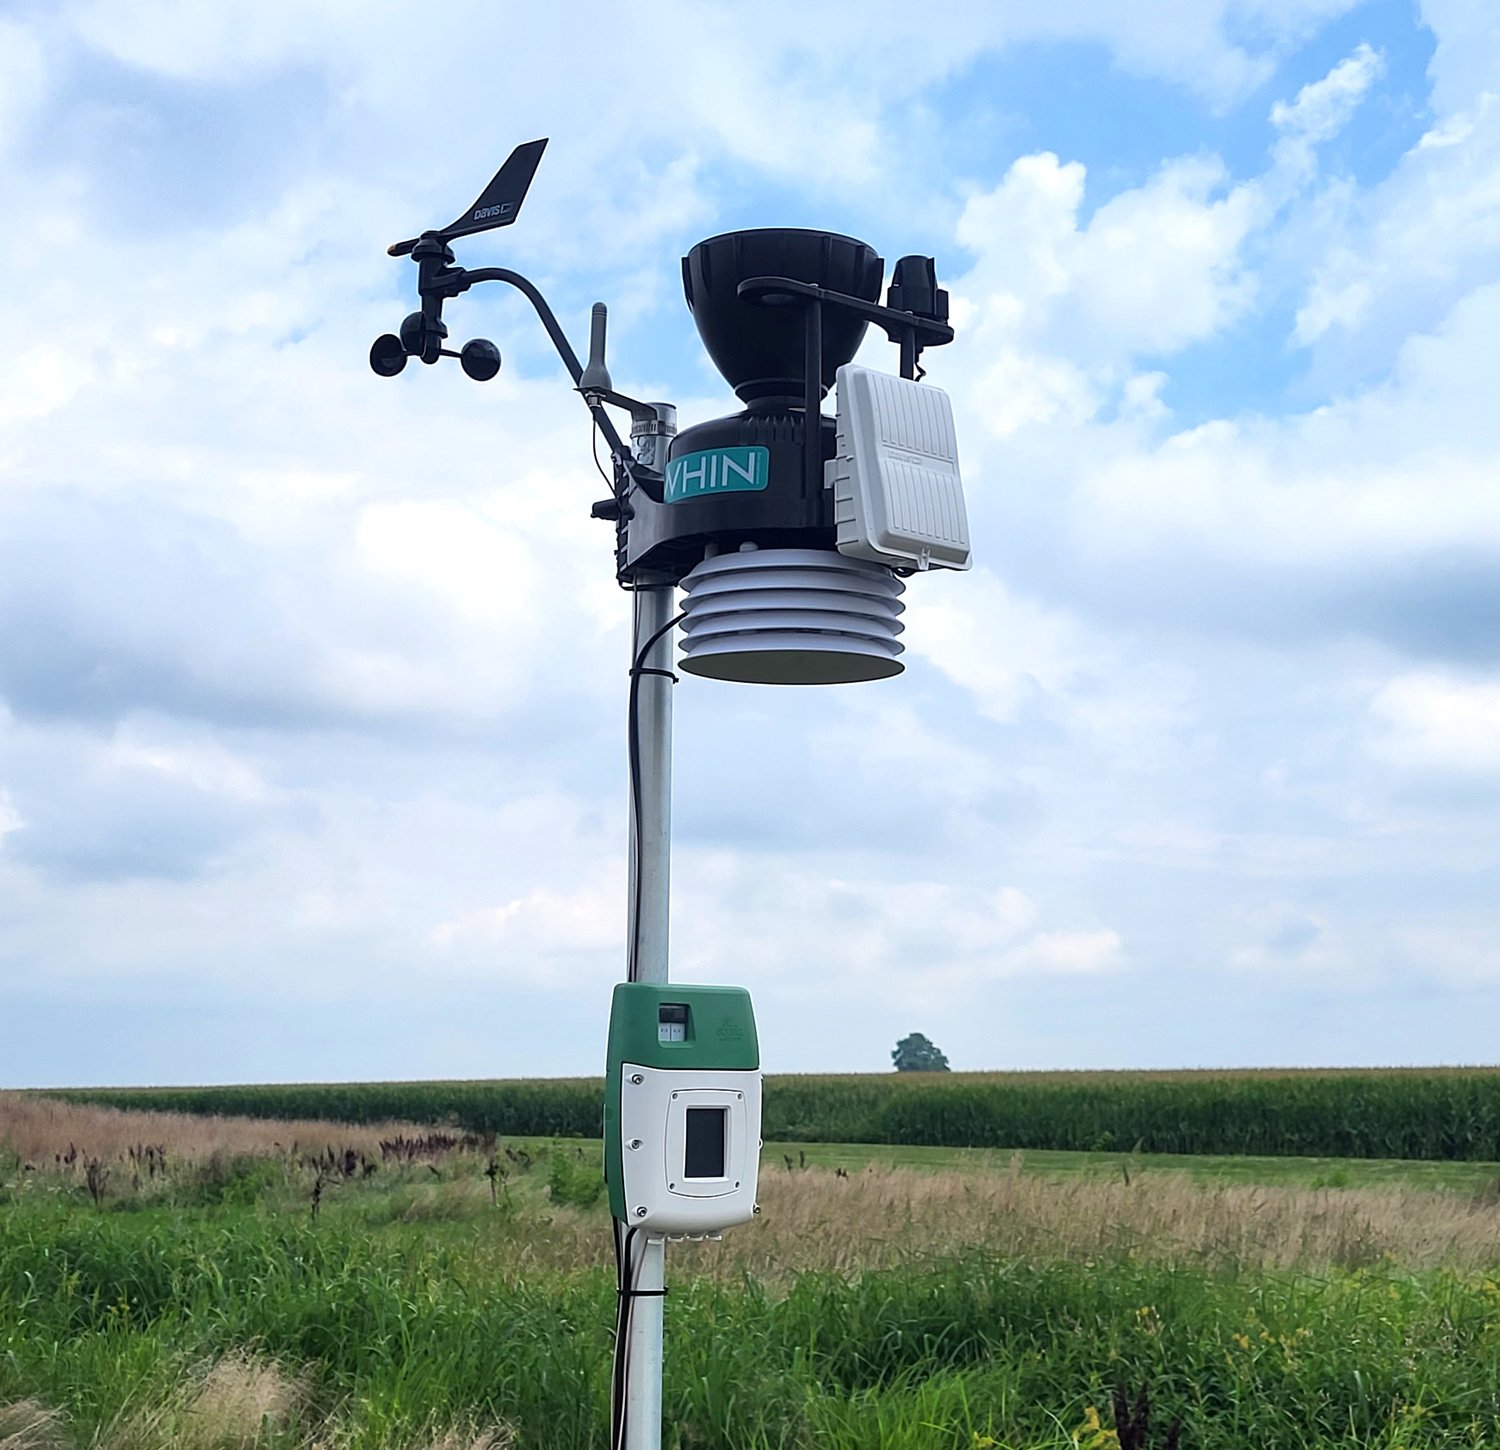 Wabash Heartland Innovation Network has partnered with Sol Chip Ltd, an Israeli based company, to build a weather station and soil monitoring solution.